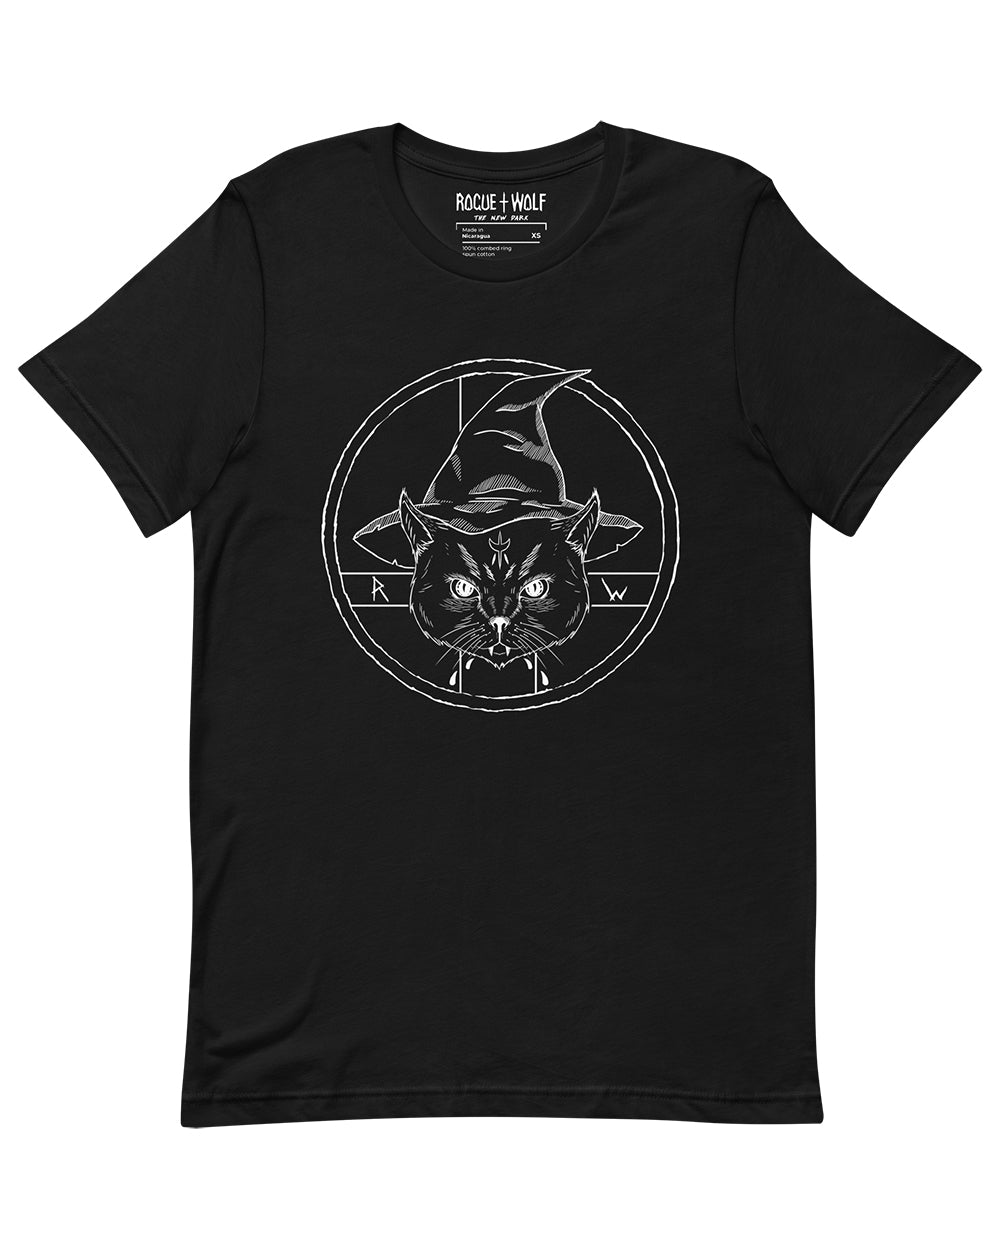 Purrfect Witchery Short Sleeve Tee - For Cat Lovers & Shamans!  - Unisex Vegan Gothic Clothing - Alternative Occult Ethical Fashion - On Demand Eco-friendly Sustainable Product